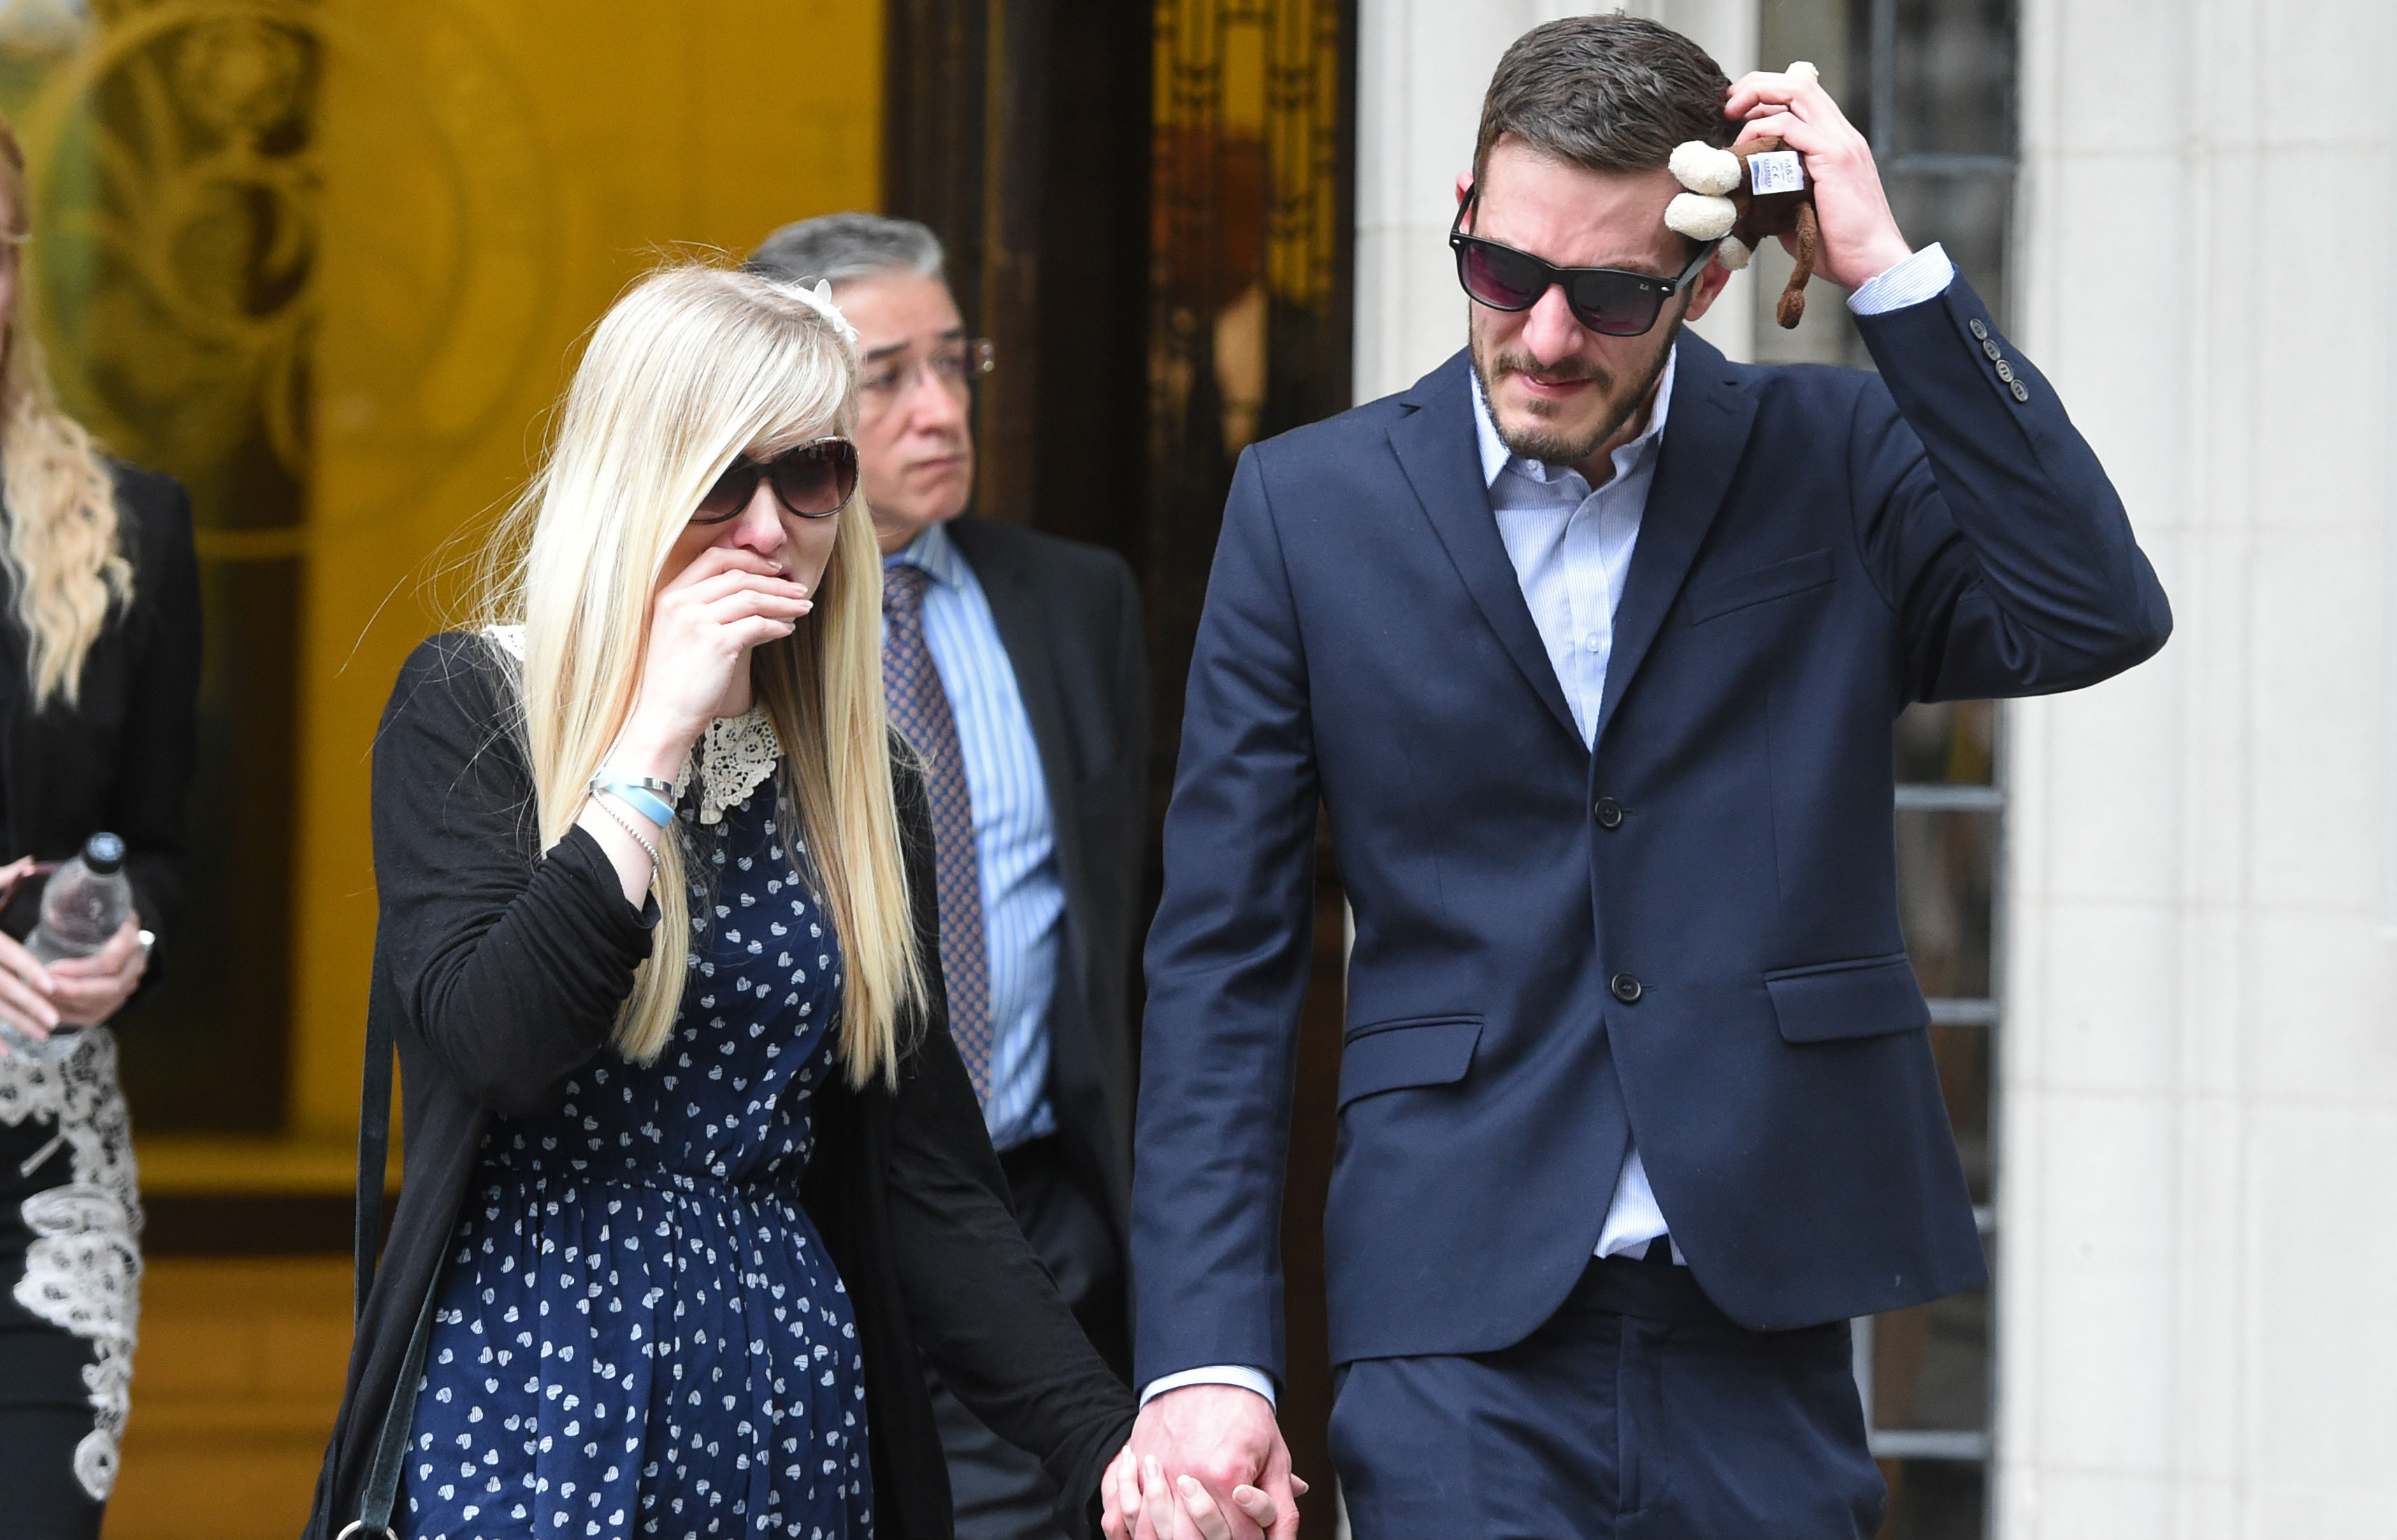 European Court delays decision on ending terminally-ill Charlie Gard's life support